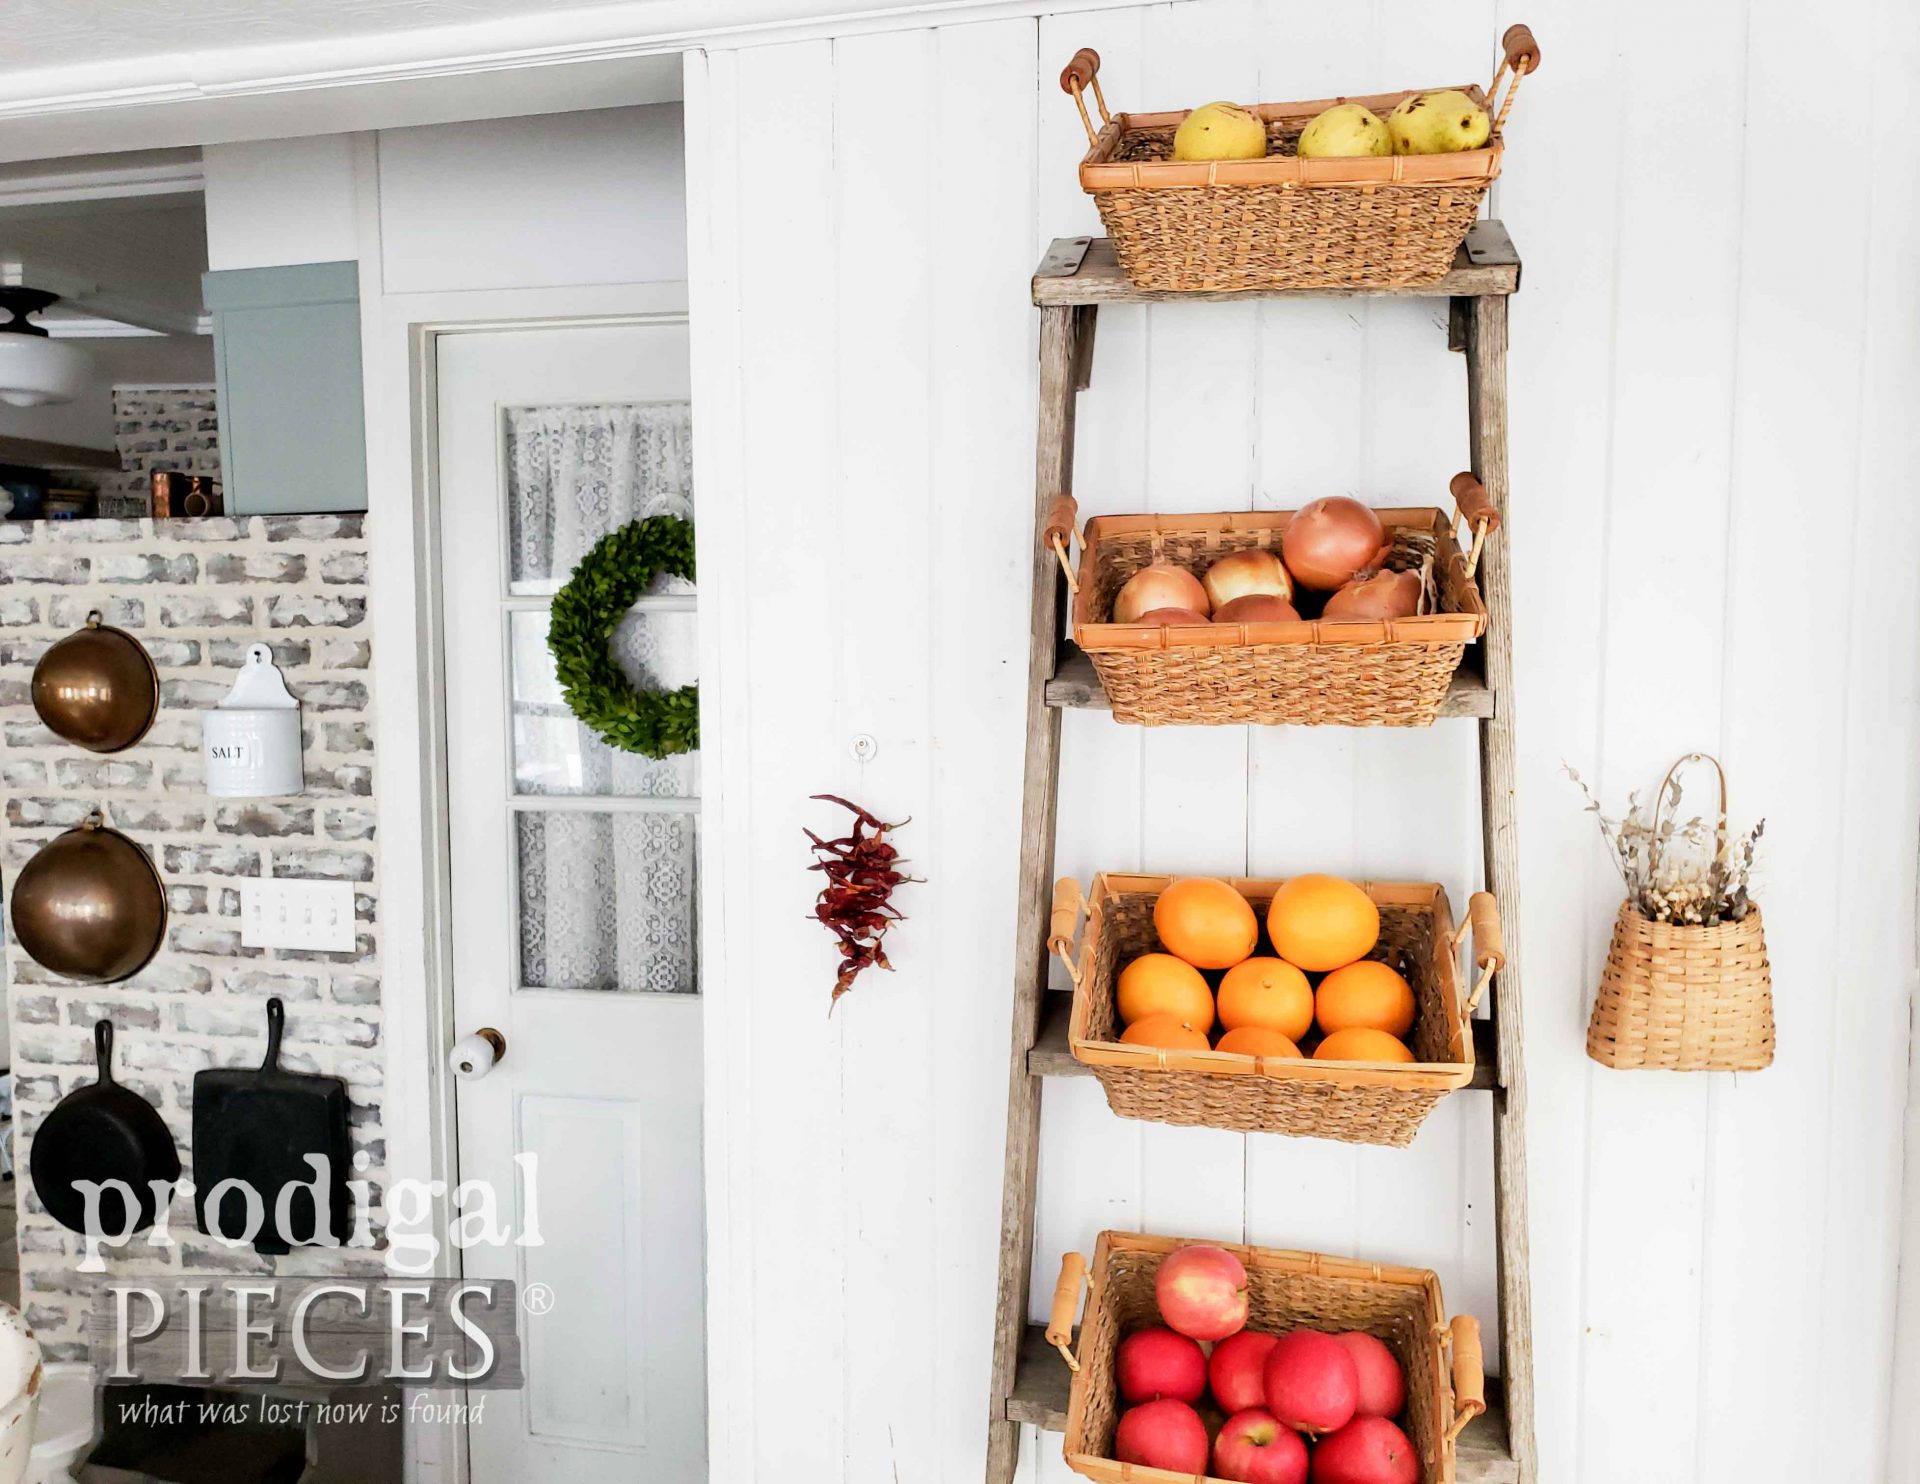 DIY Farmhouse Decor Tour with oodles of upcycling ideas by Larissa of Prodigal Pieces | prodigalpieces.com #prodigalpieces #diy #farmhouse #hometour #homedecor #kitchen